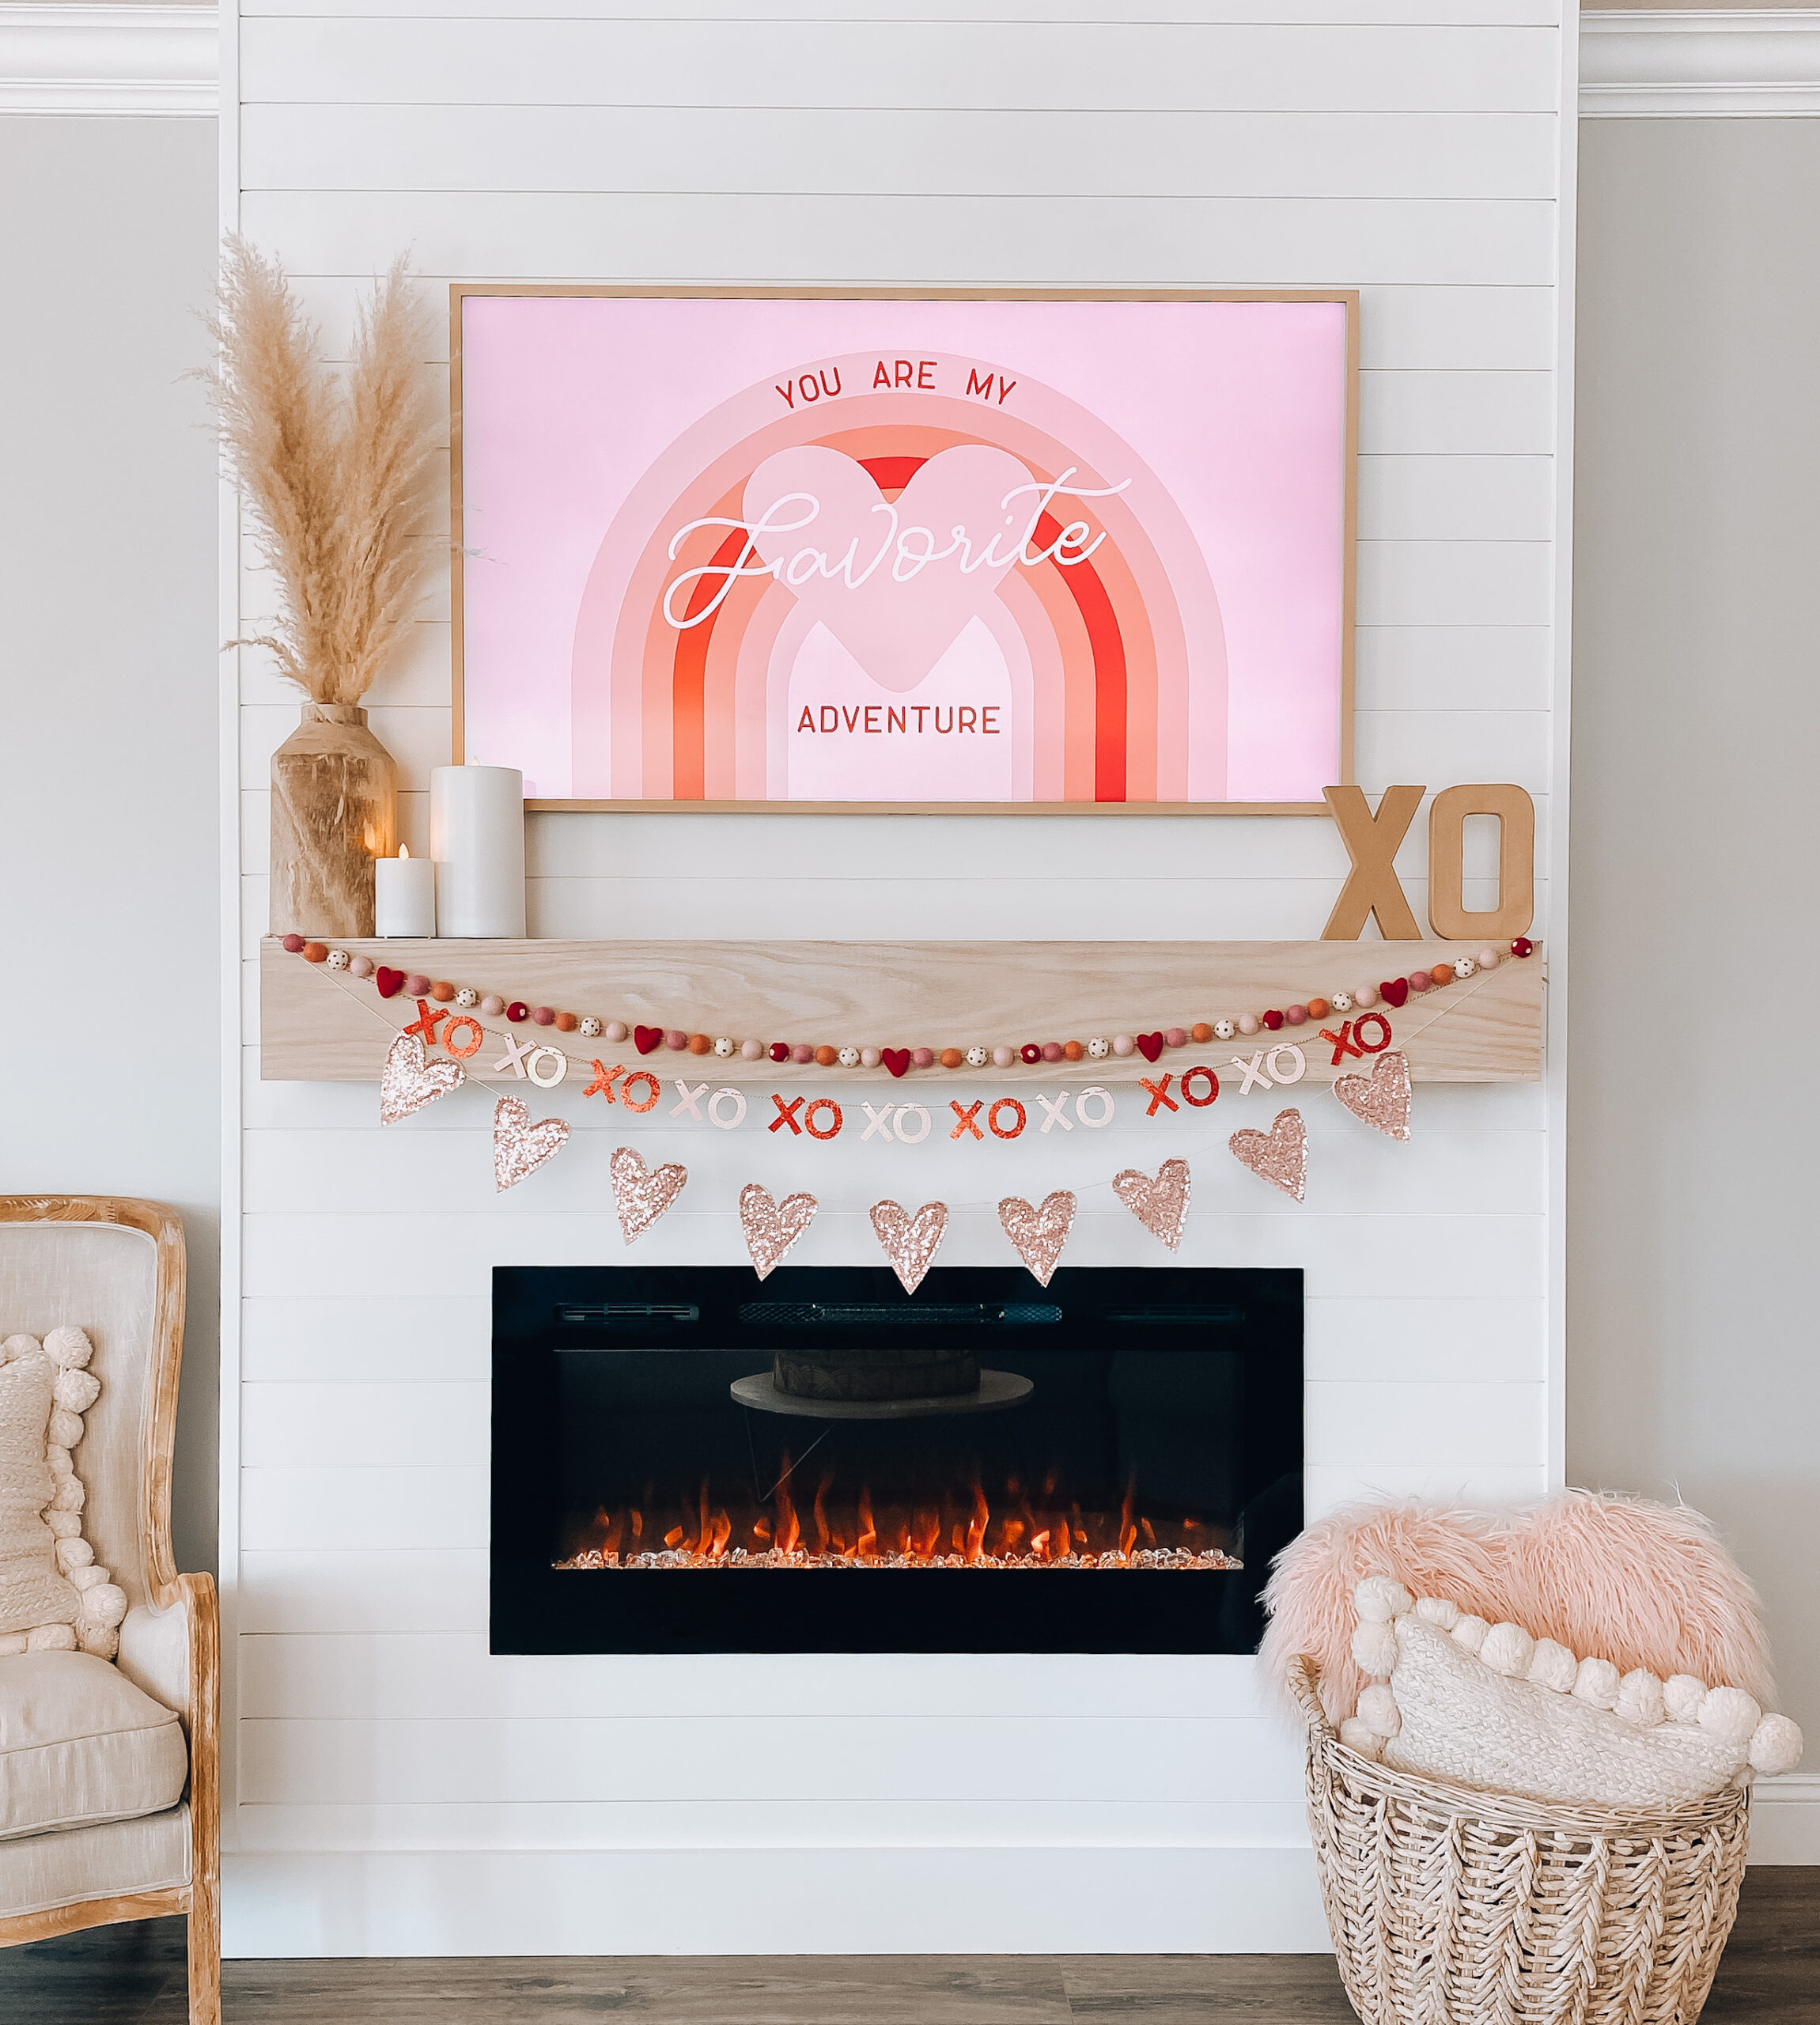 fireplace mantel with red and pink garlands with rainbow image on tv You're my Favorite Adventure